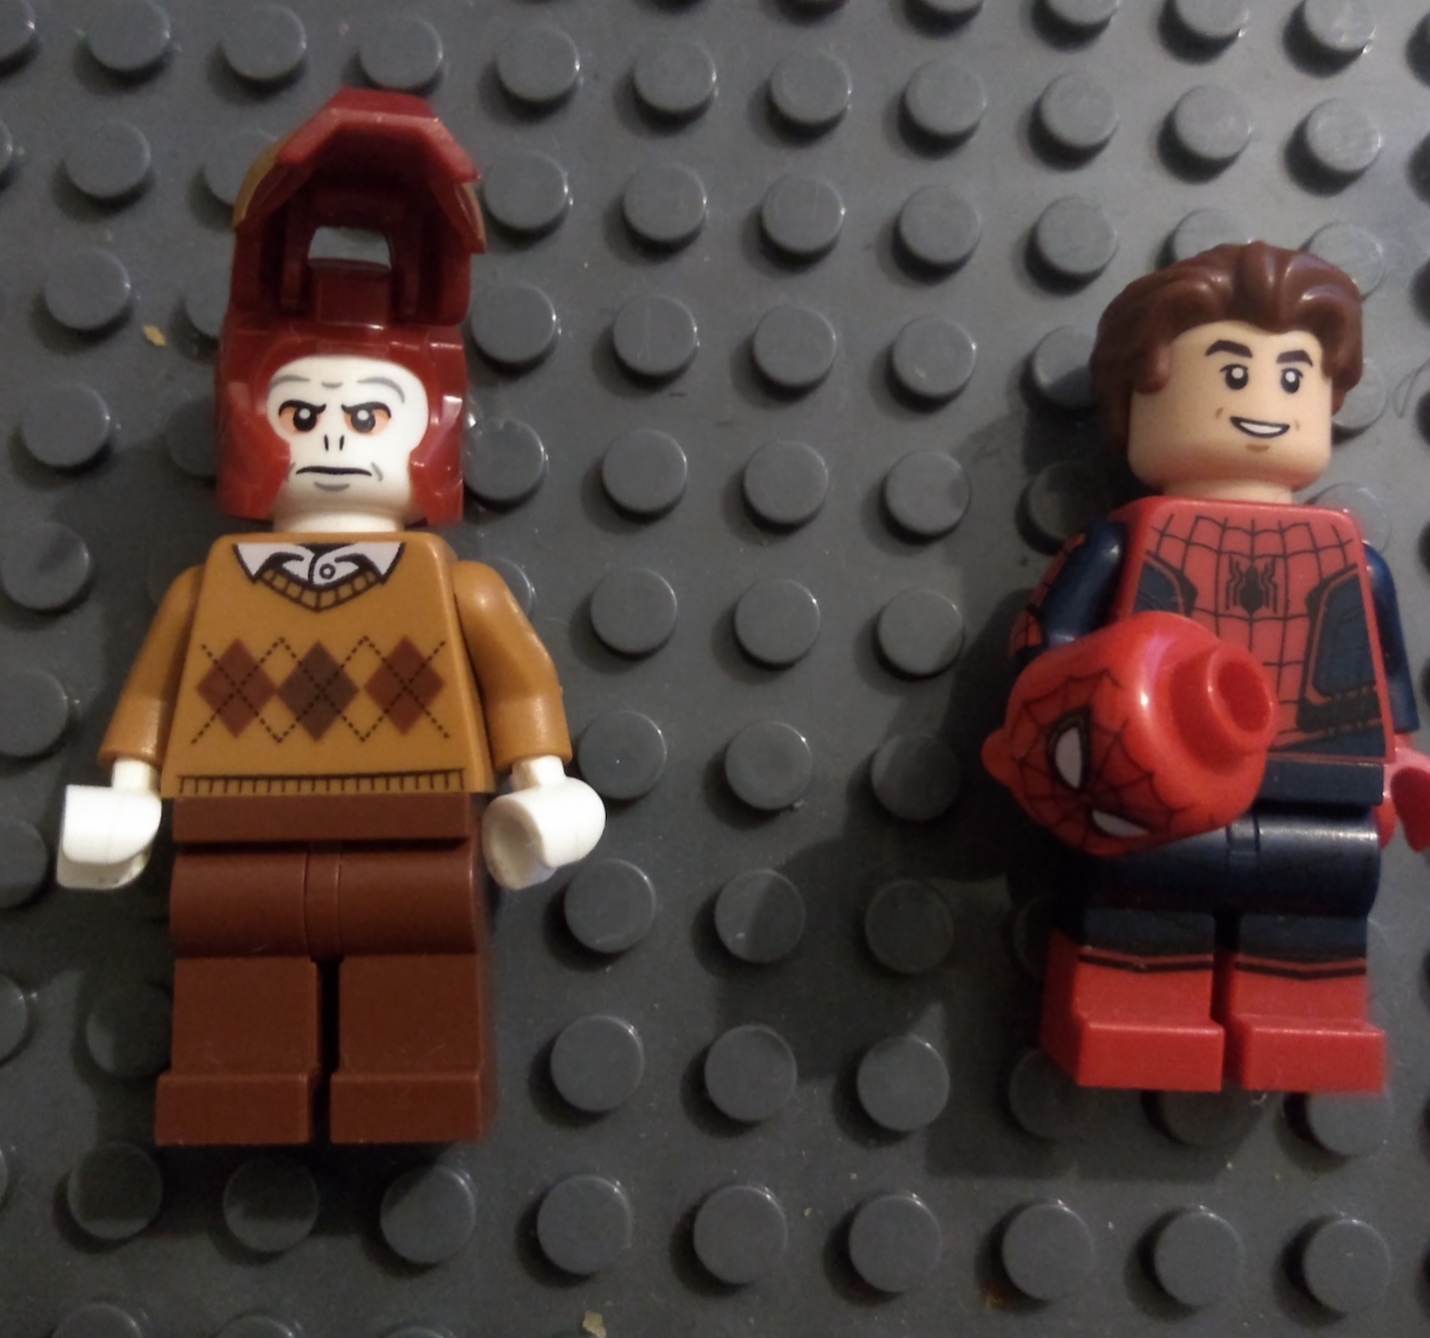 talent Specialist Hvordan Creating LEGO Minifigures with Spare Pieces - Minifigures.com Blog